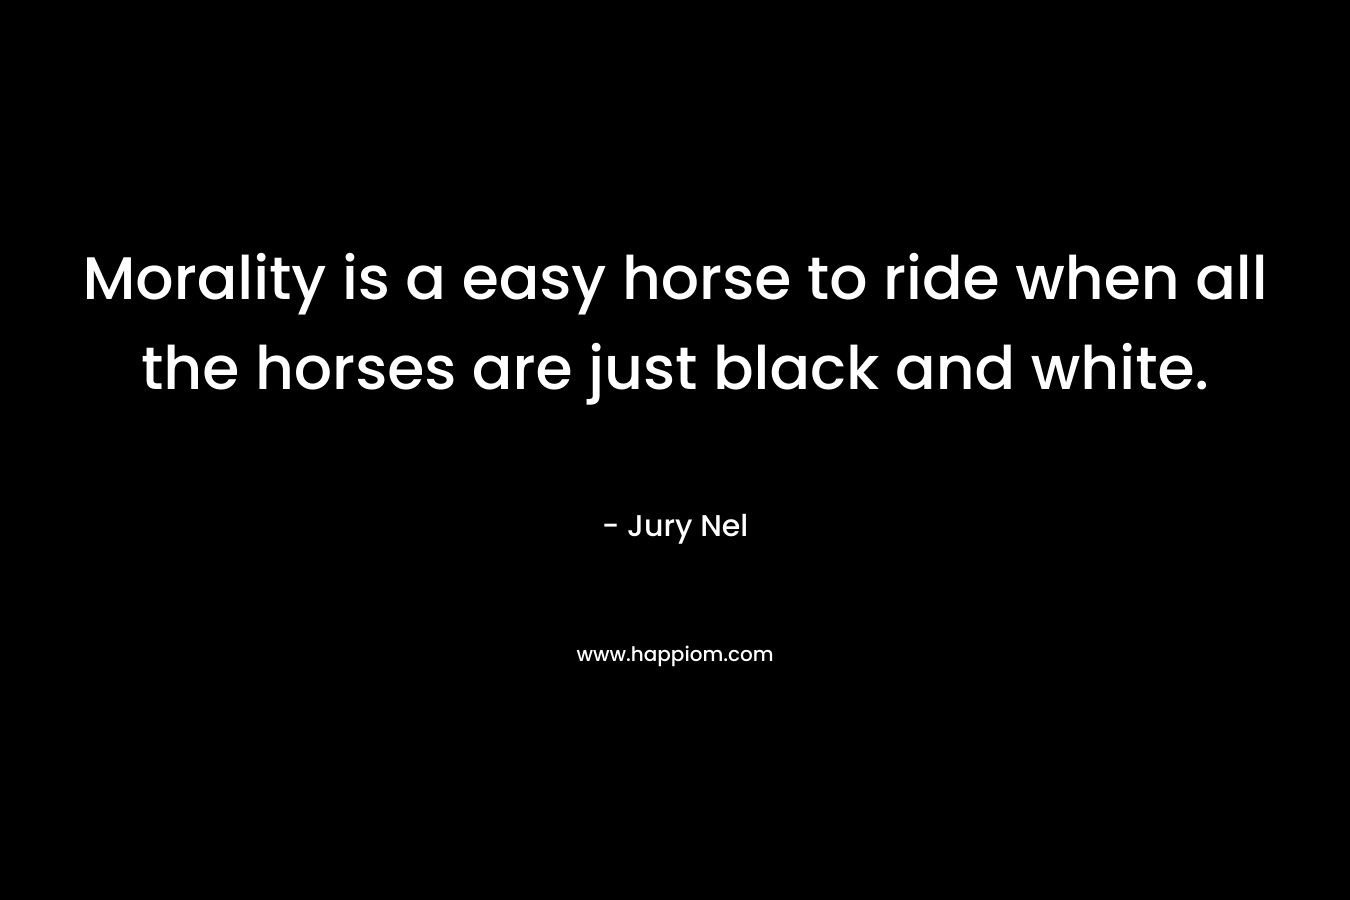 Morality is a easy horse to ride when all the horses are just black and white. – Jury Nel